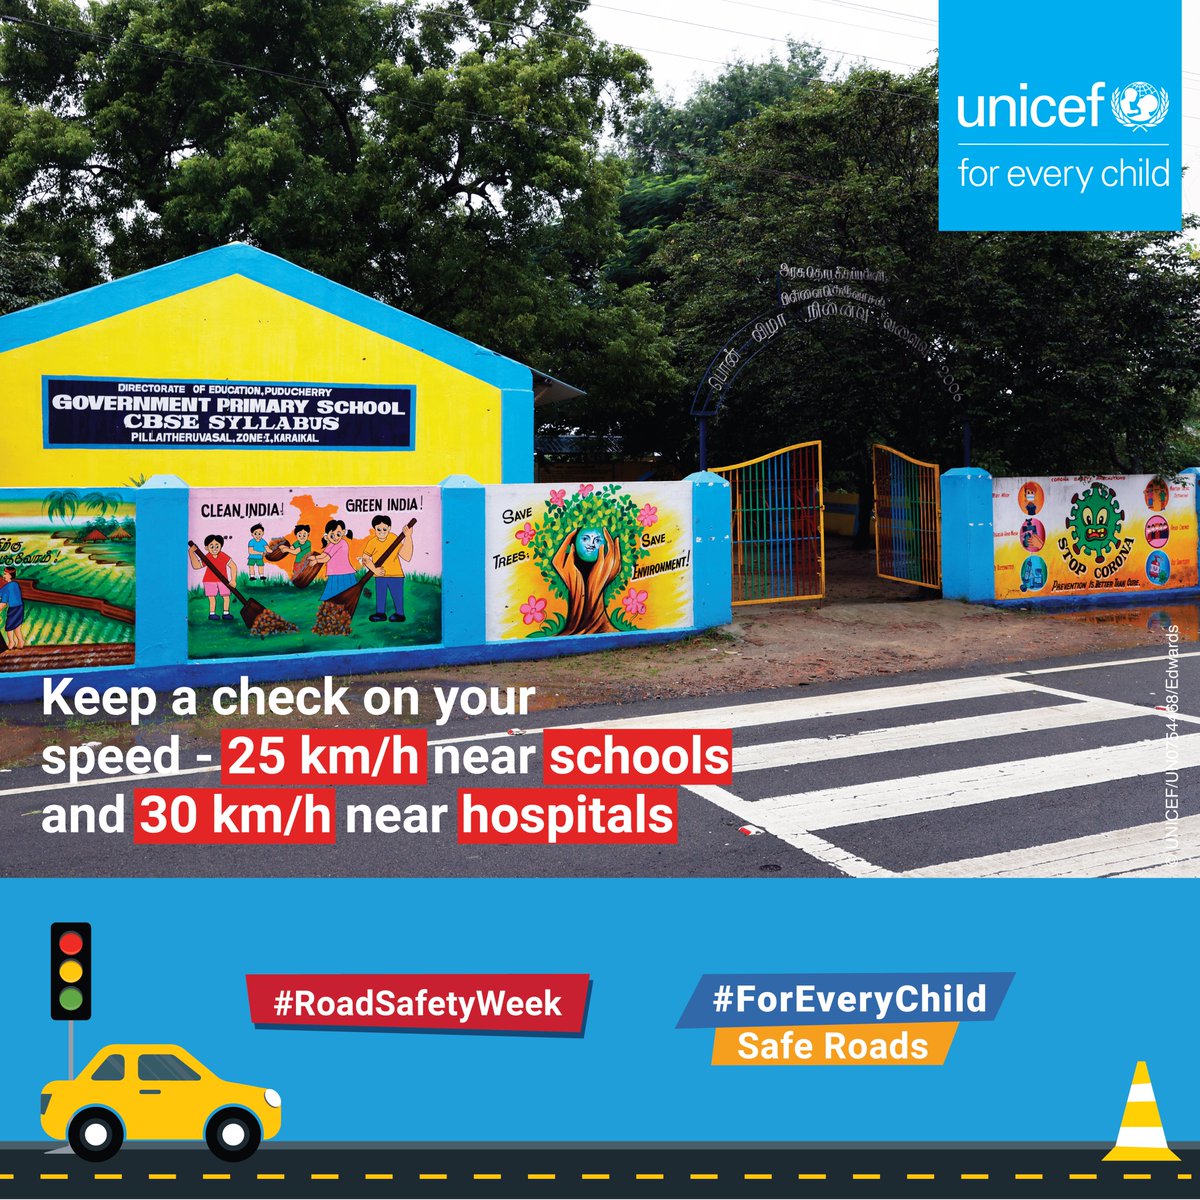 Safety must be at the core of our efforts to reimagine how we move in the world.

Road safety solutions should be designed with the most at risk in mind, first, like children and adolescents.

#RoadSafetyWeek